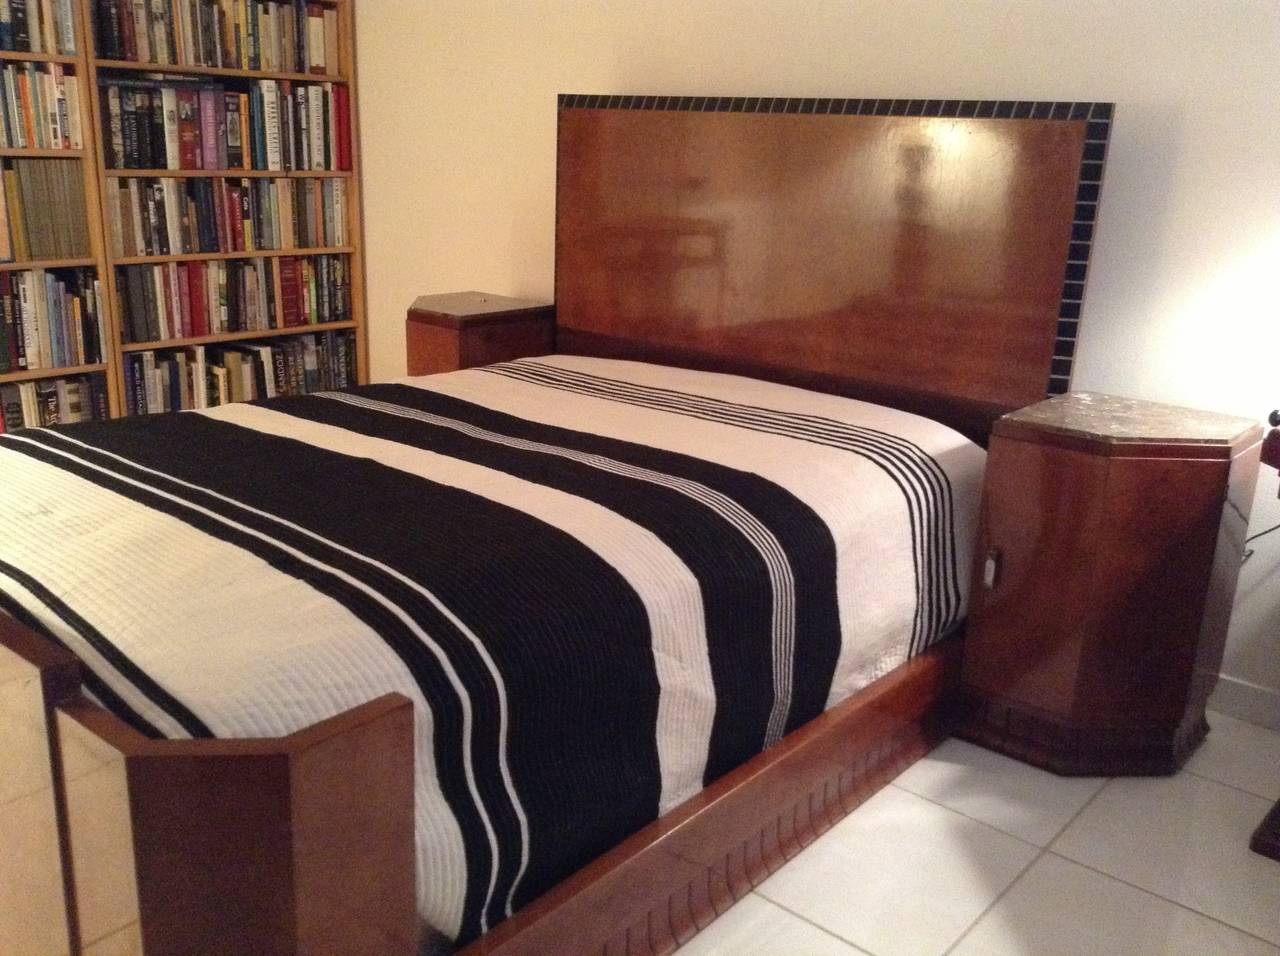 Mid-20th Century French Art Deco Modernist Bedroom Suite